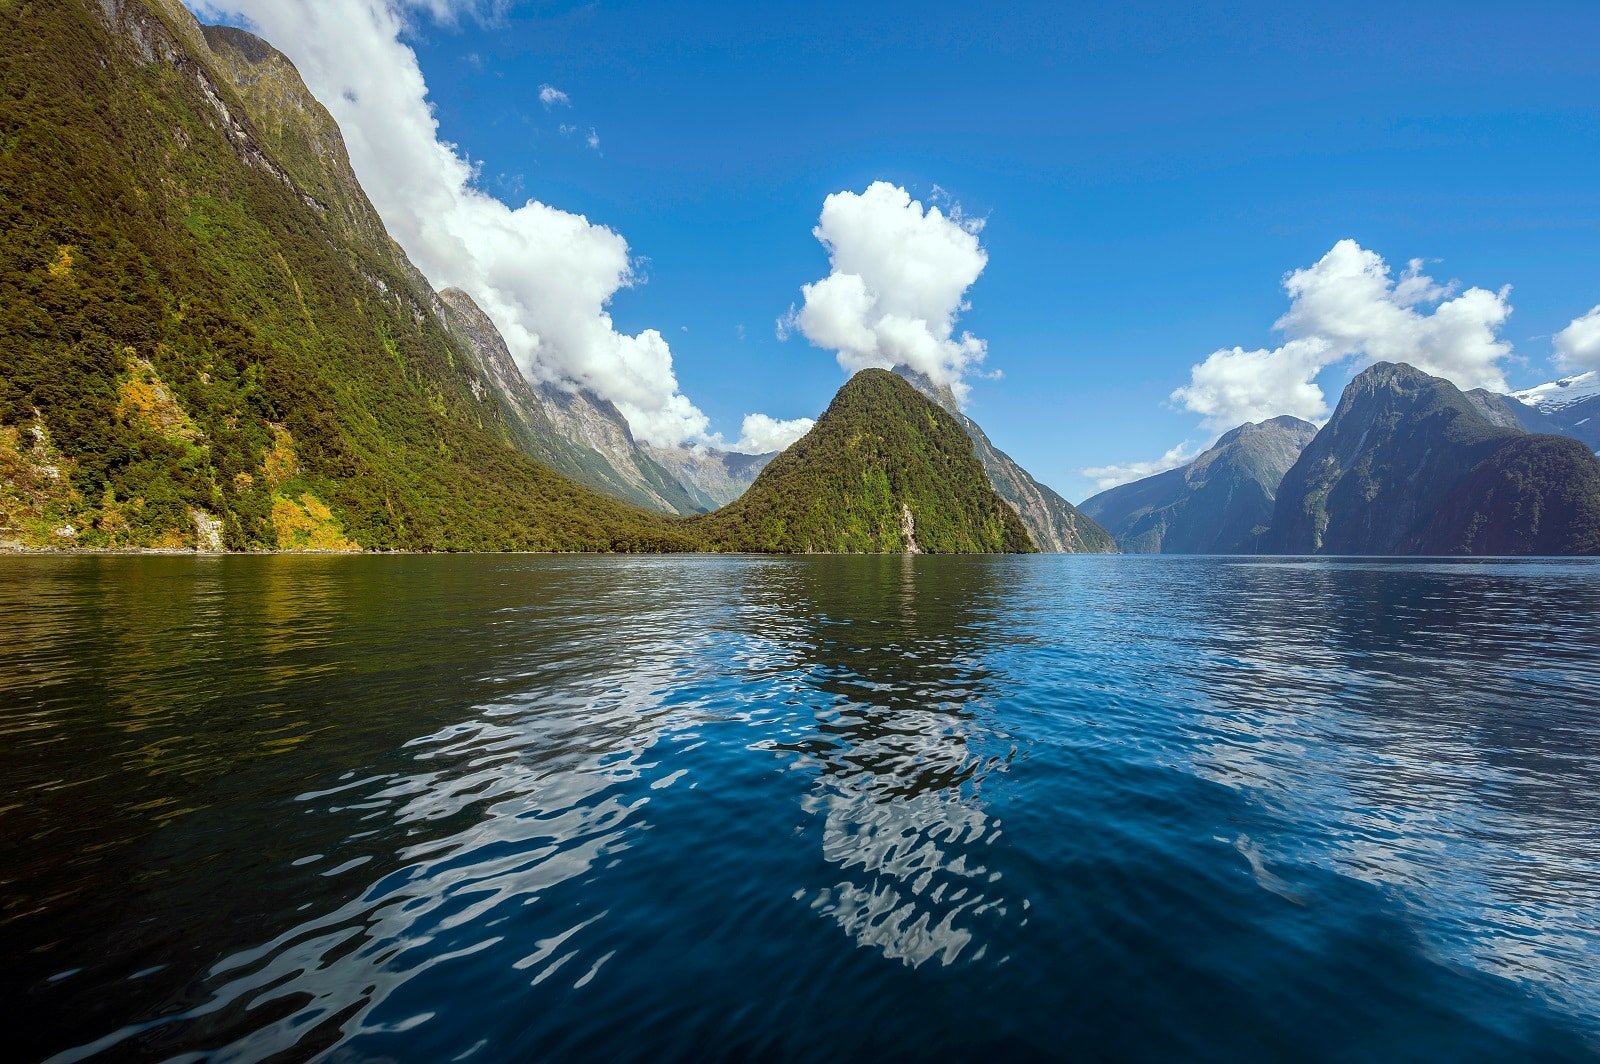 <p><span>Milford Sound, a jewel in Fiordland National Park’s crown, is renowned for its awe-inspiring beauty. With its iconic Mitre Peak, this fjord is a paradise for nature lovers and photographers. A cruise on Milford Sound offers spectacular views of waterfalls, including the famous Stirling and Bowen Falls, and a chance to spot wildlife like seals, dolphins, and penguins.</span></p> <p><span>For the more adventurous, kayaking provides an up-close experience with the fjord’s water and wildlife. The Milford Track, one of New Zealand’s Great Walks, offers an unforgettable hiking experience through stunning landscapes leading to the fjord. </span></p> <p><b>Insider’s Tip: </b><span>Take an early morning cruise to experience the fjord in tranquil conditions.</span></p> <p><b>When To Travel: </b><span>Visit during the shoulder seasons (Spring and Autumn) for fewer crowds.</span></p> <p><b>How To Get There: </b><span>Milford Sound is accessible by road from Te Anau or via scenic flights from Queenstown.</span></p>